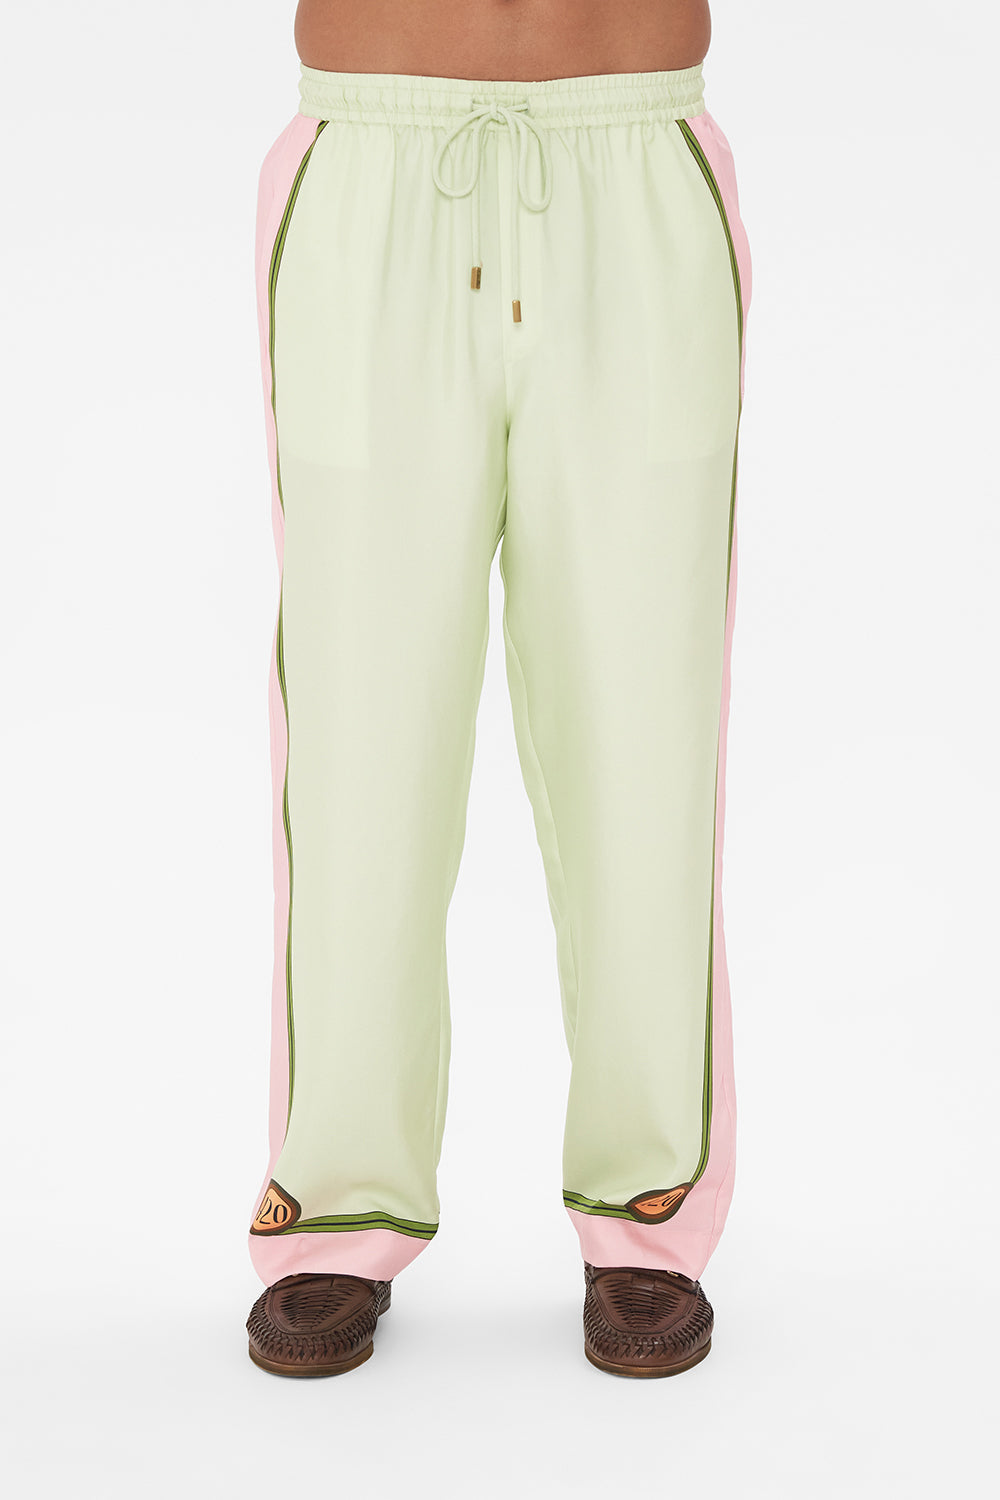 Hotel Franks by CAMILLA  mens lounge pants in Lets Chase Rainbows print